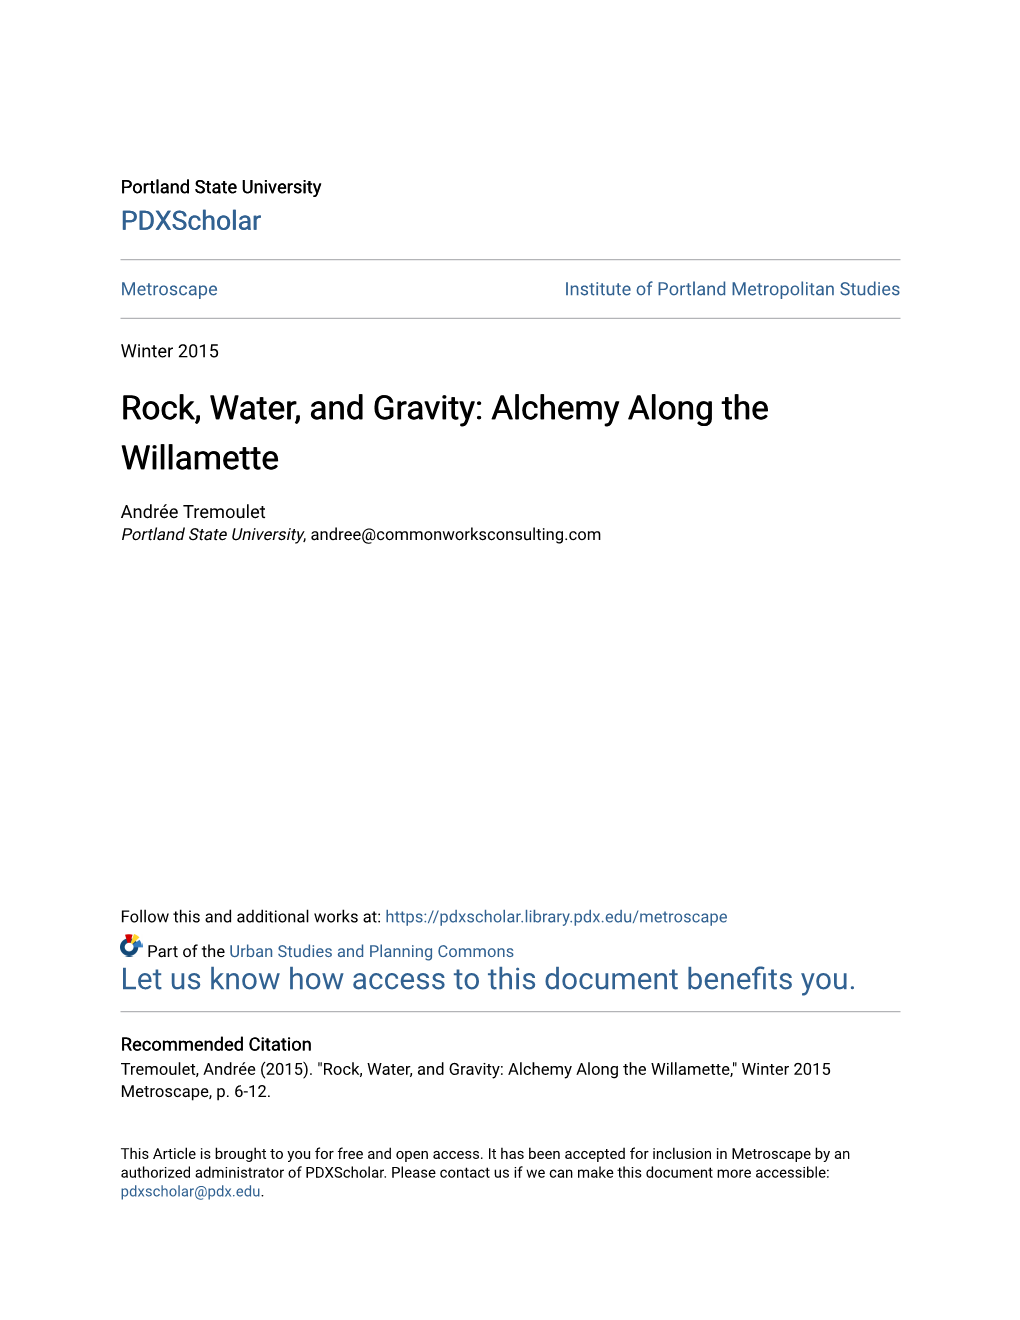 Rock, Water, and Gravity: Alchemy Along the Willamette